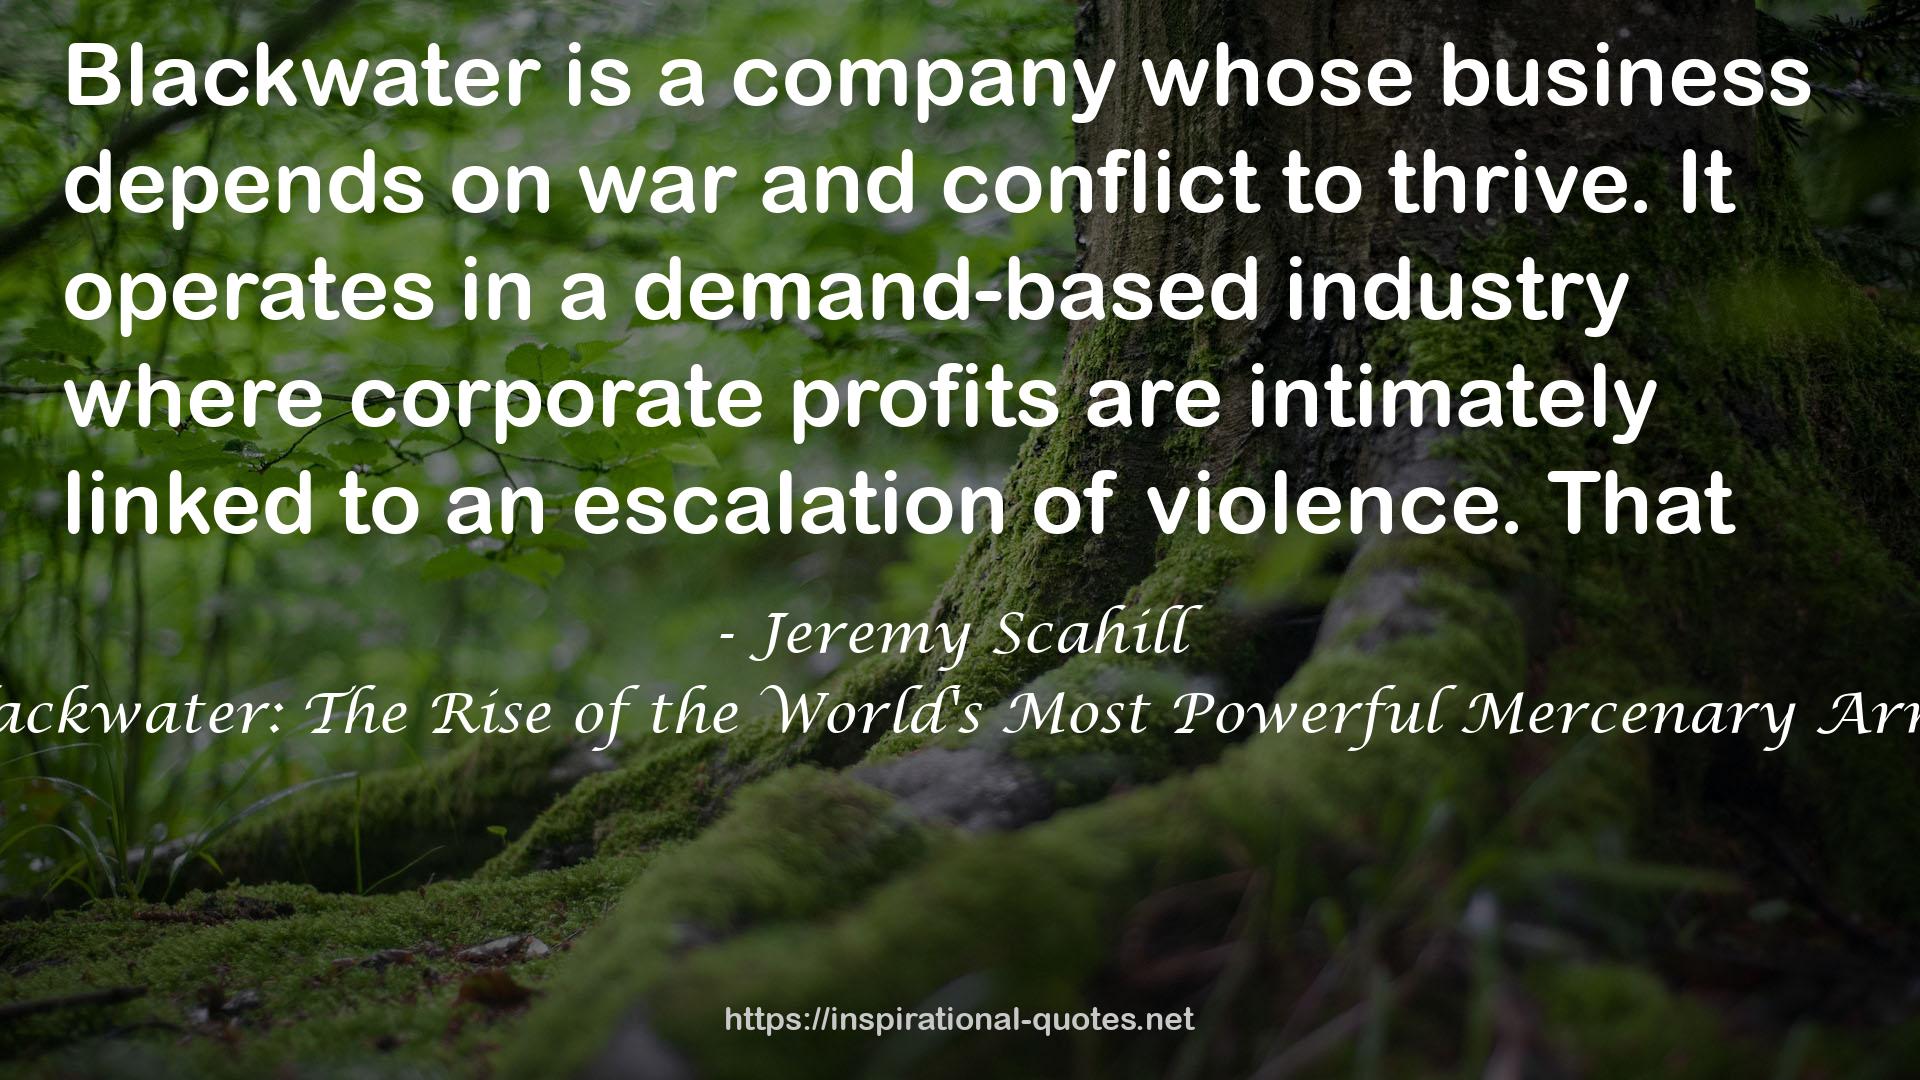 Blackwater: The Rise of the World's Most Powerful Mercenary Army QUOTES